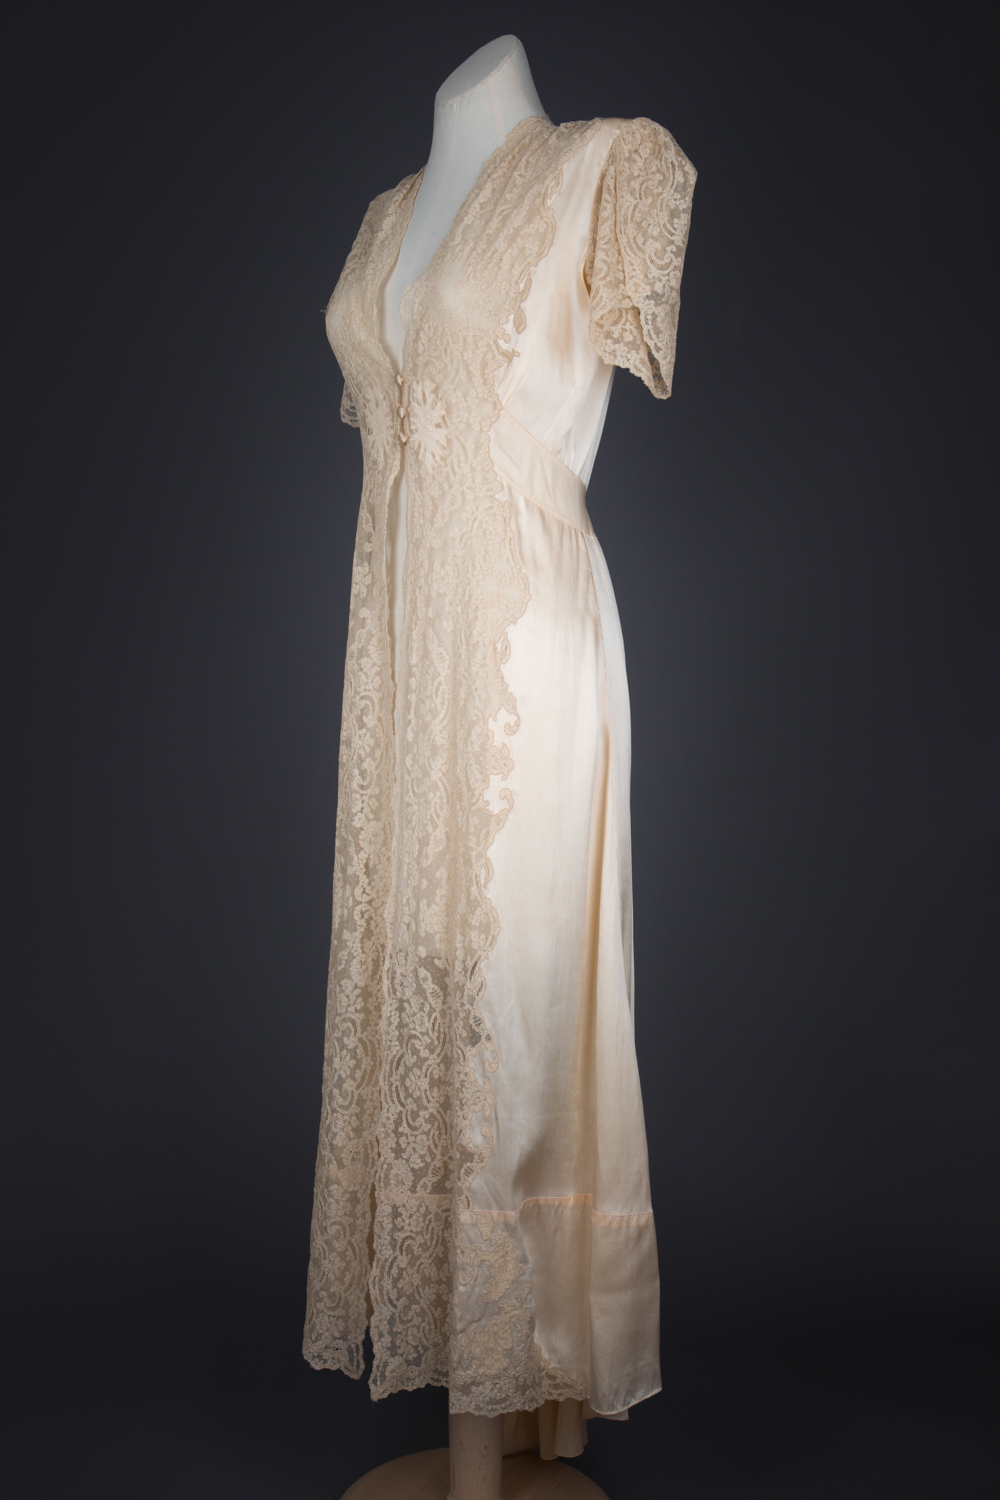 Peach Silk Satin & Corded Lace Appliquéd Peignoir, c. 1930s, USA. The Underpinnings Museum. Photography by Tigz Rice.